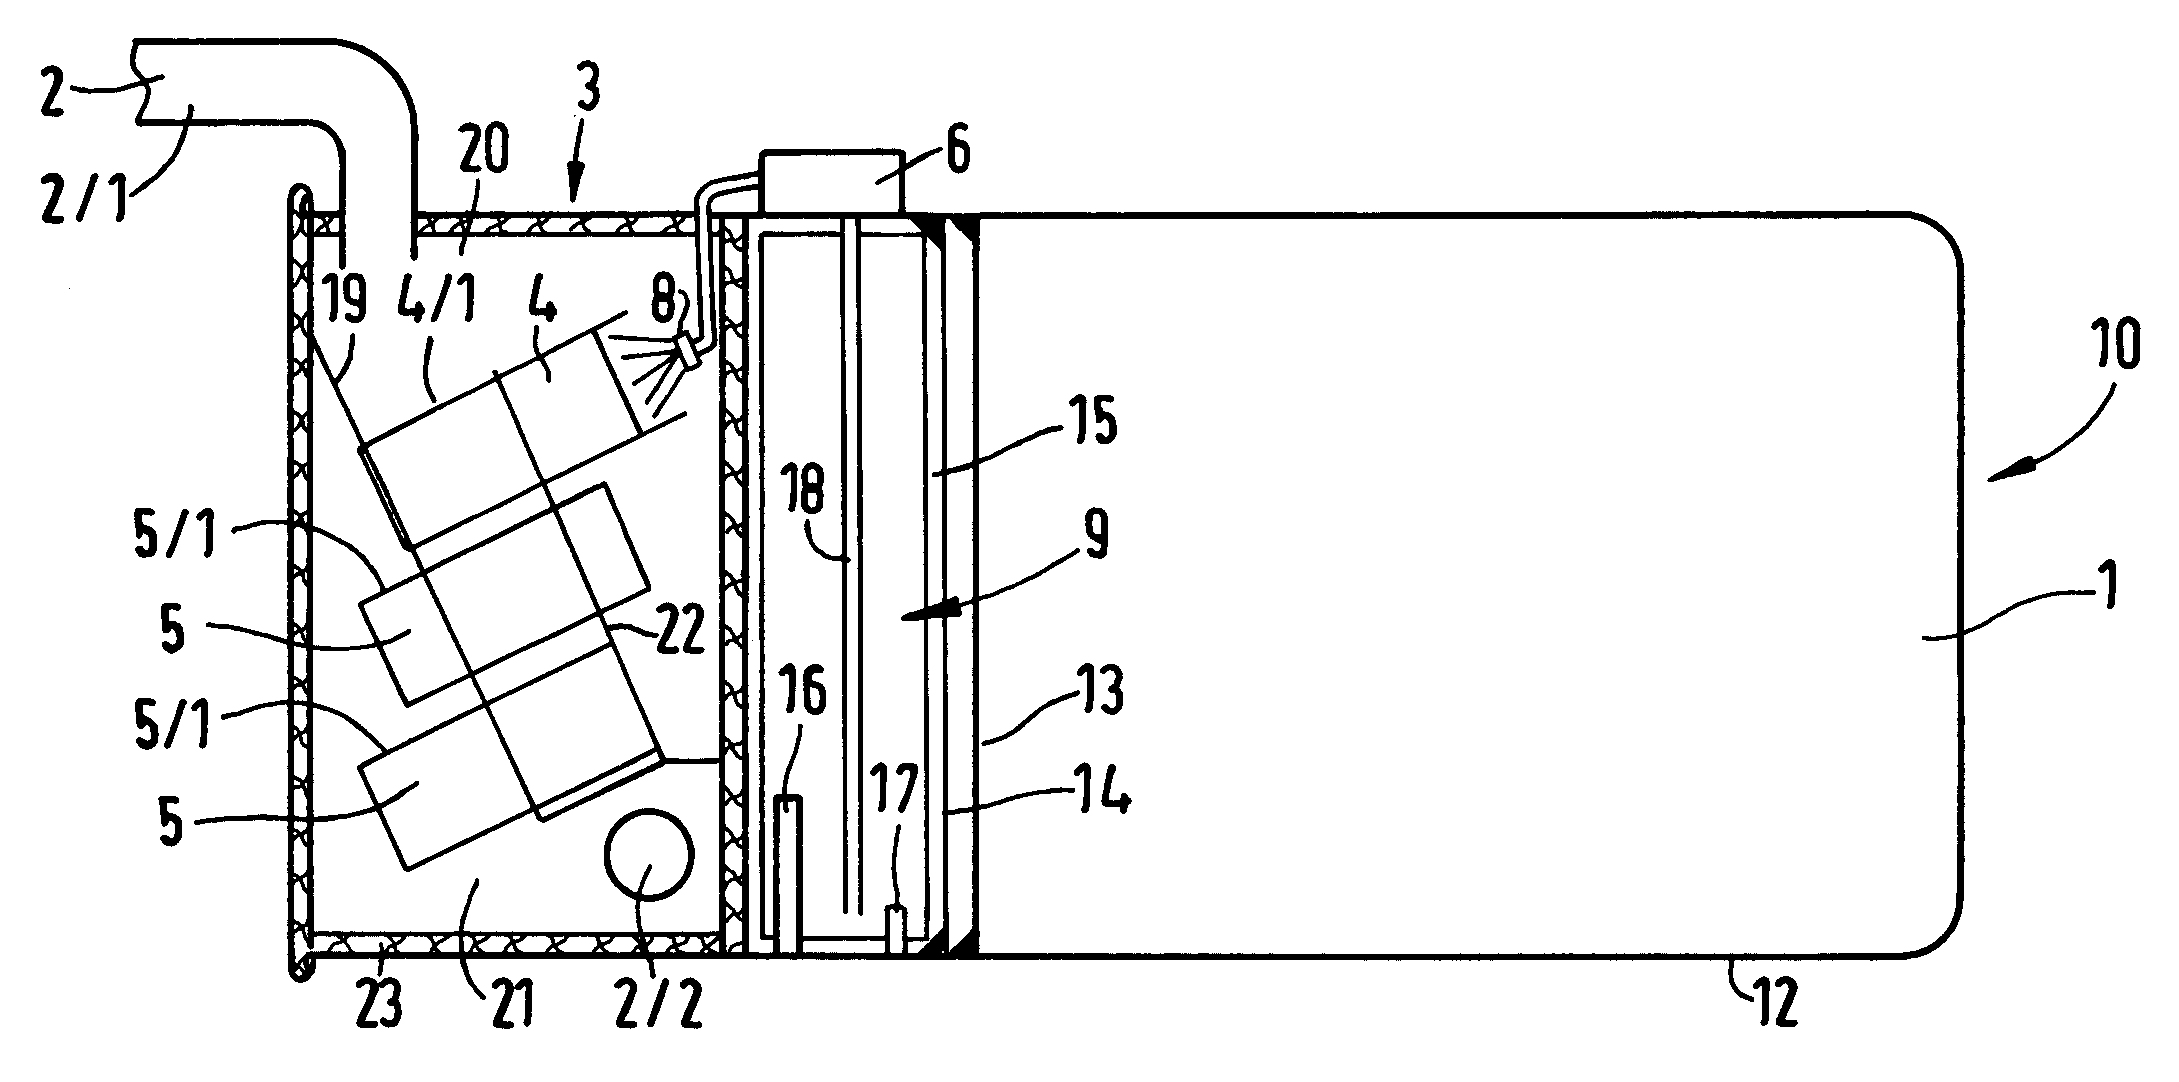 Motor vehicle having special arrangement of fuel tank, preliminary muffler and reduction agent tank